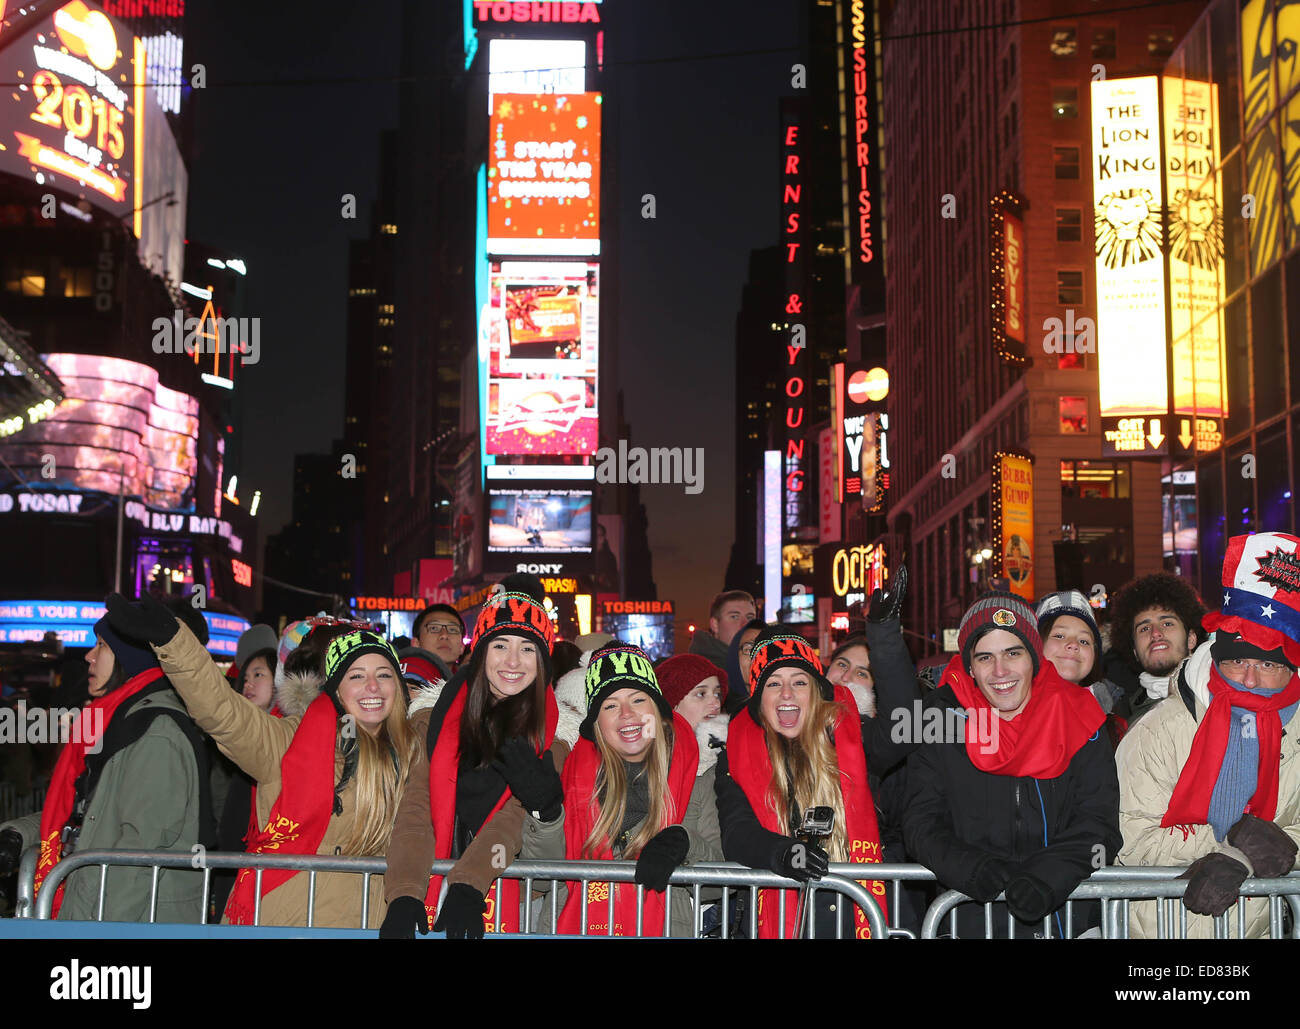 New York, USA. 31st Dec, 2014. People participate in the New Year's Eve celebration at Times Square in New York, the United States on Dec. 31, 2014. Times Square has been the center of worldwide attention on New Year's Eve for more than 100 years. The first Ball Lowering celebration occurred in 1907, and this tradition is now a universal symbol of welcoming the New Year. Credit:  Qin Lang/Xinhua/Alamy Live News Stock Photo